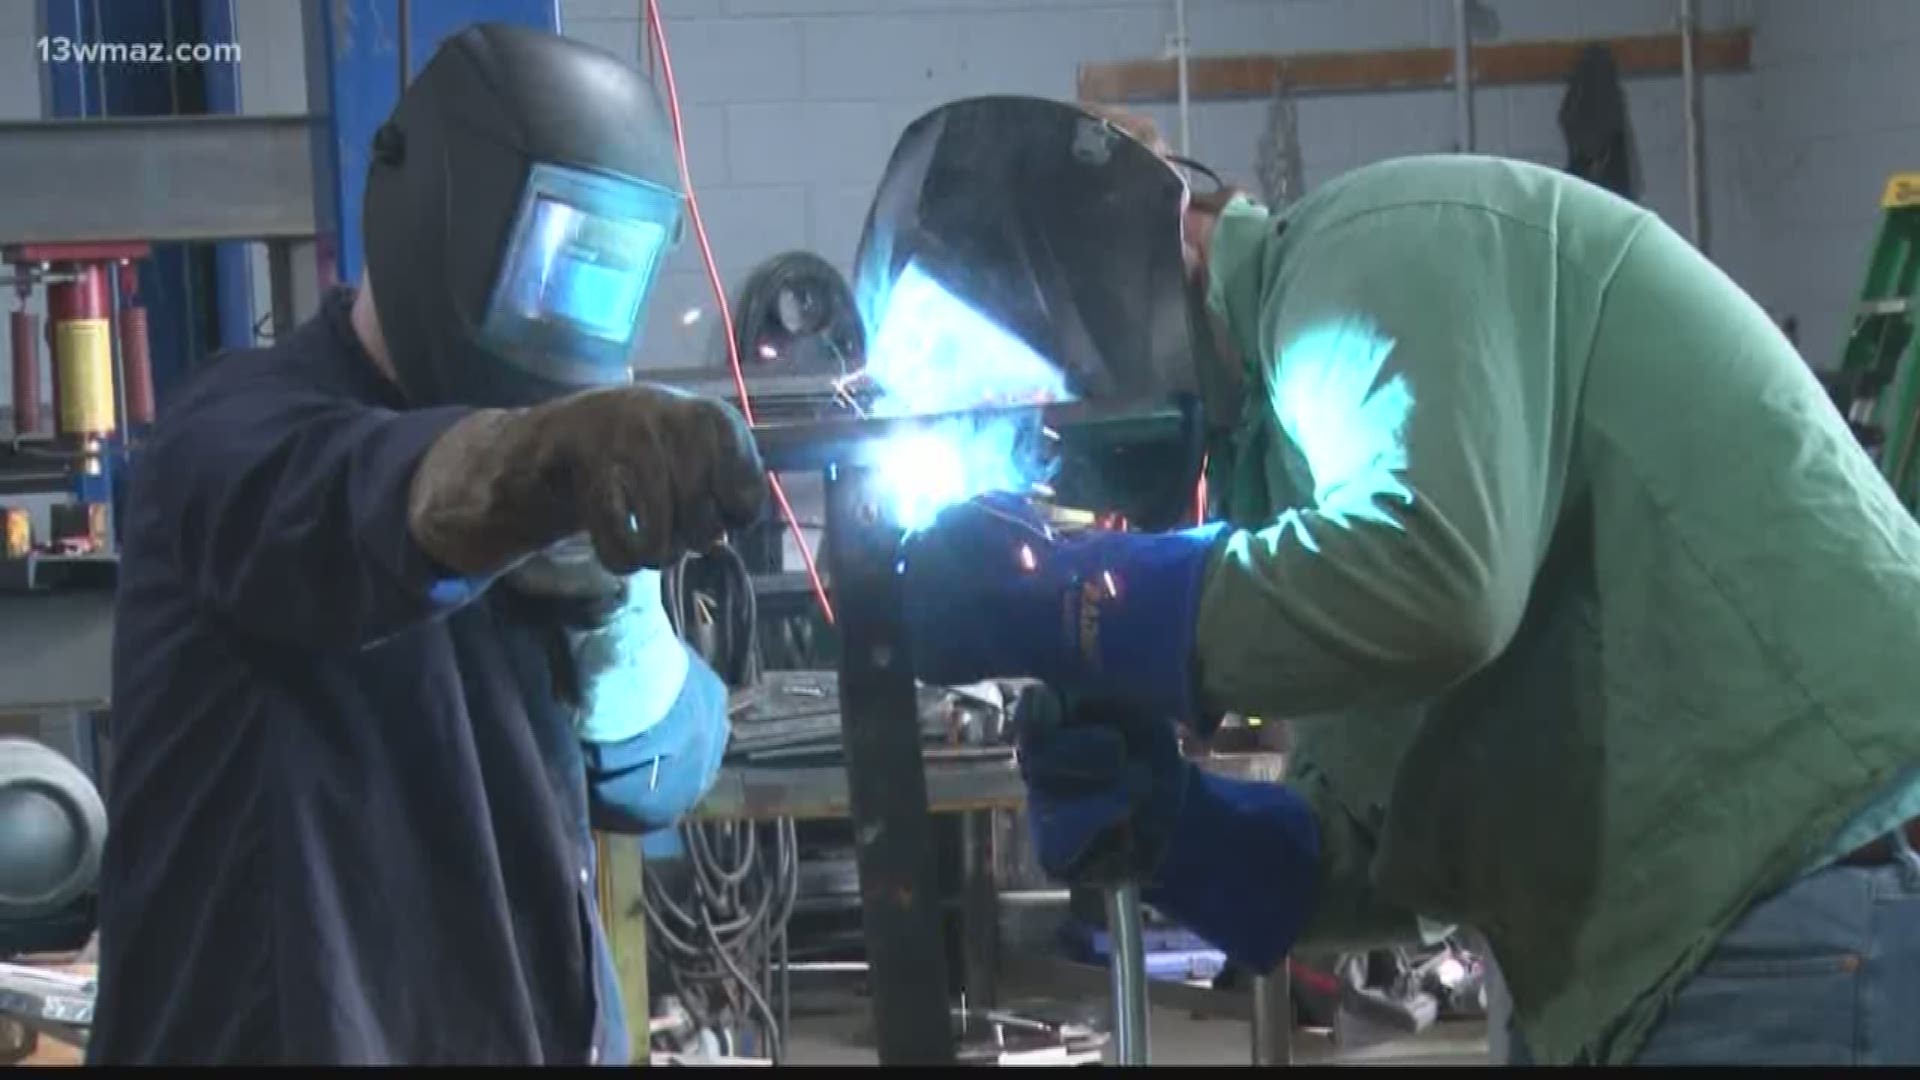 Construction, welding and firefighter students will go head to head in a state-wide competition in Atlanta.